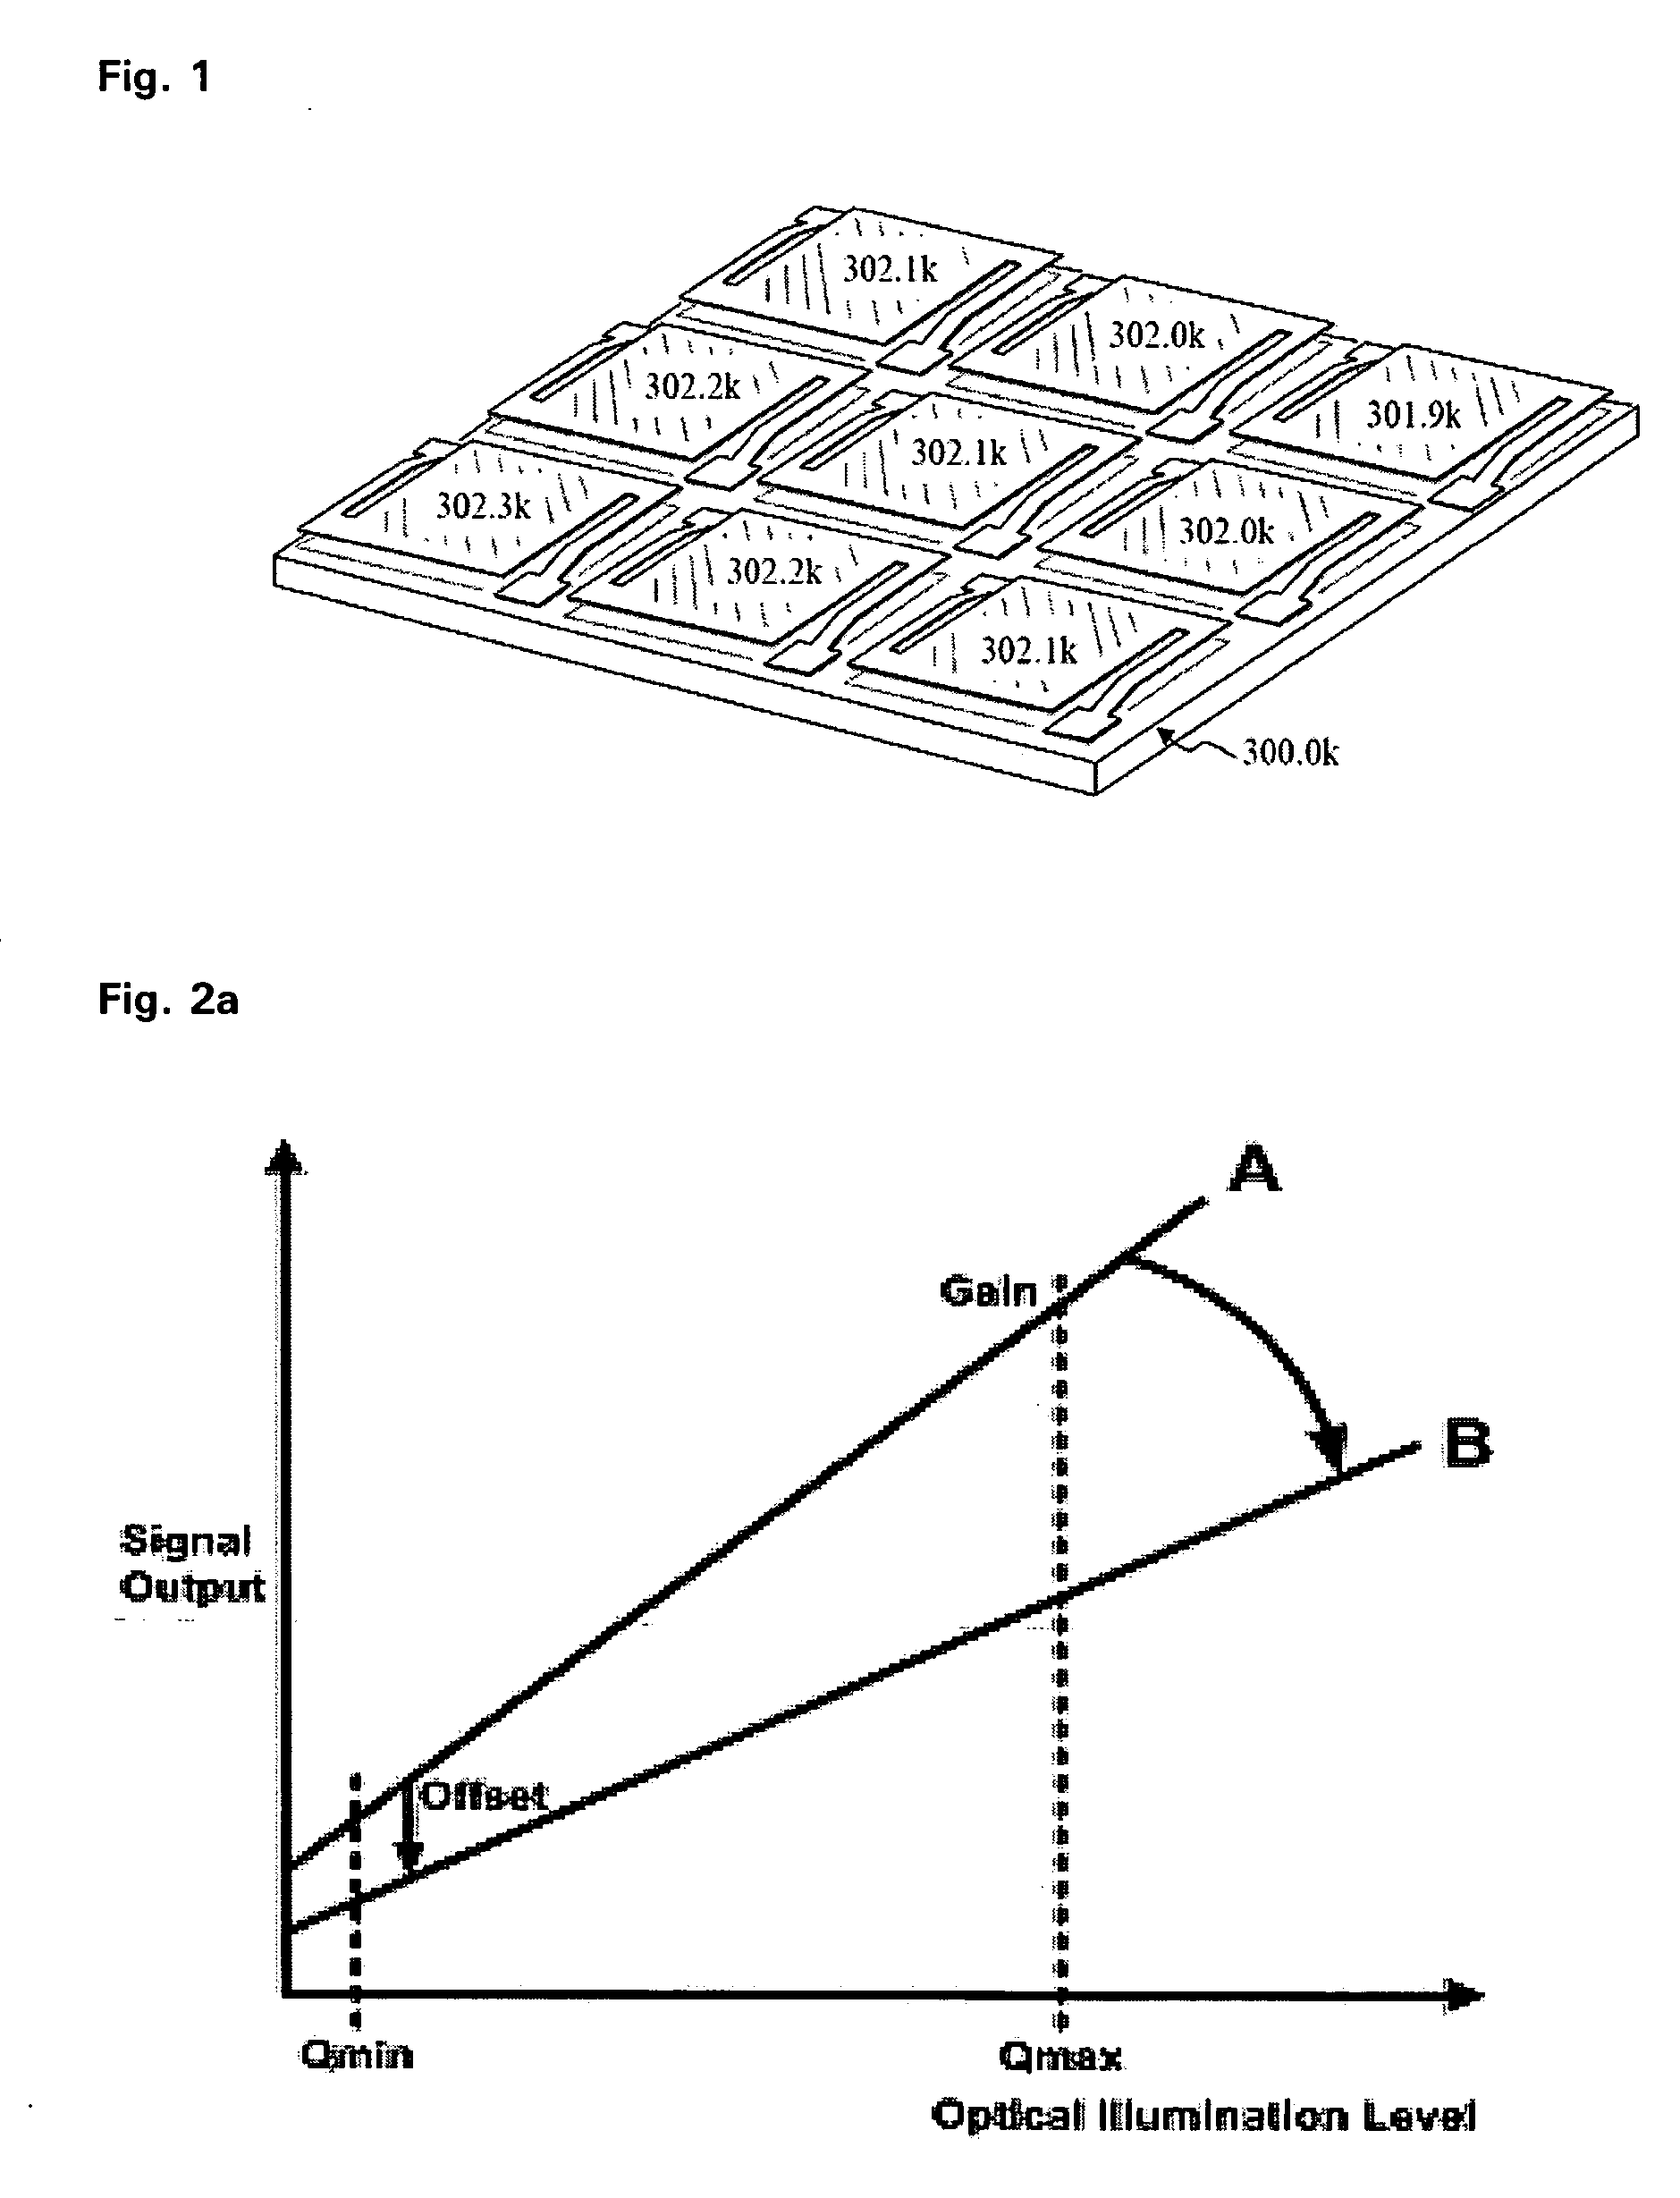 Compensation circuit for compensating non-uniformity according to change of operating temperature of bolometer